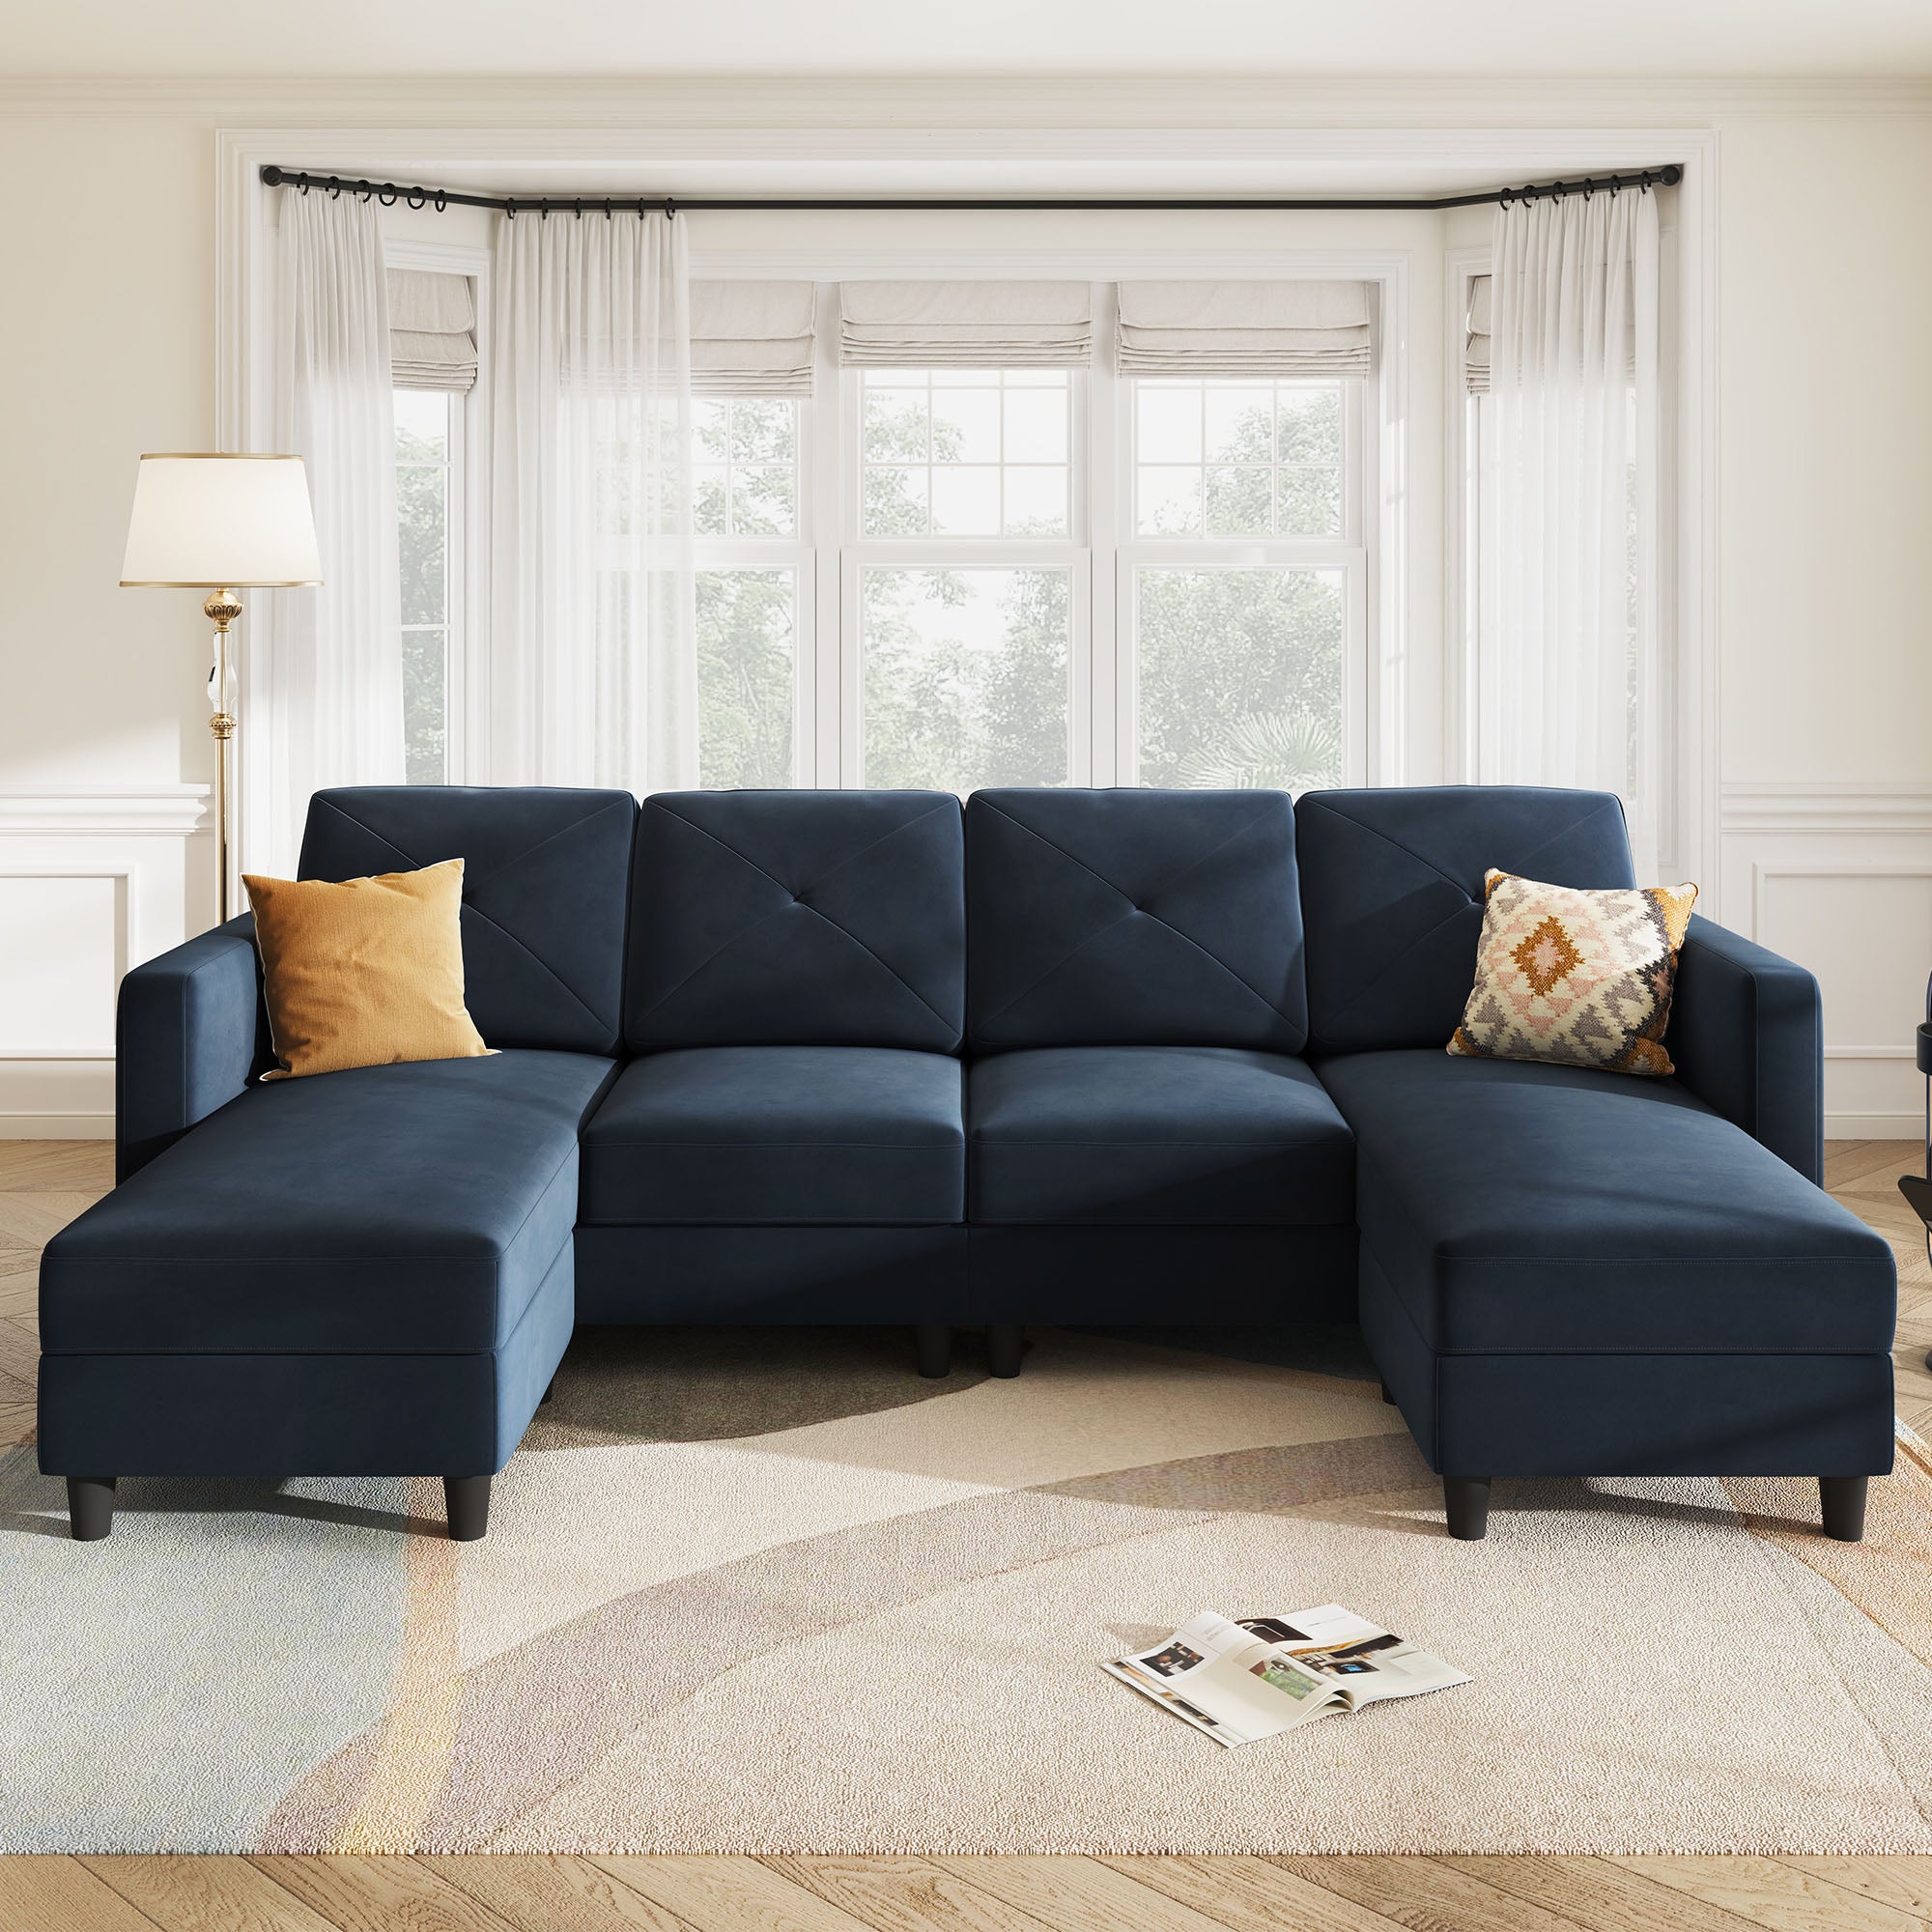 HONBAY 4-Seat U-Shaped Sofa Convertible Sectional Sofa with Reversible Chaise #Color_Dark Blue